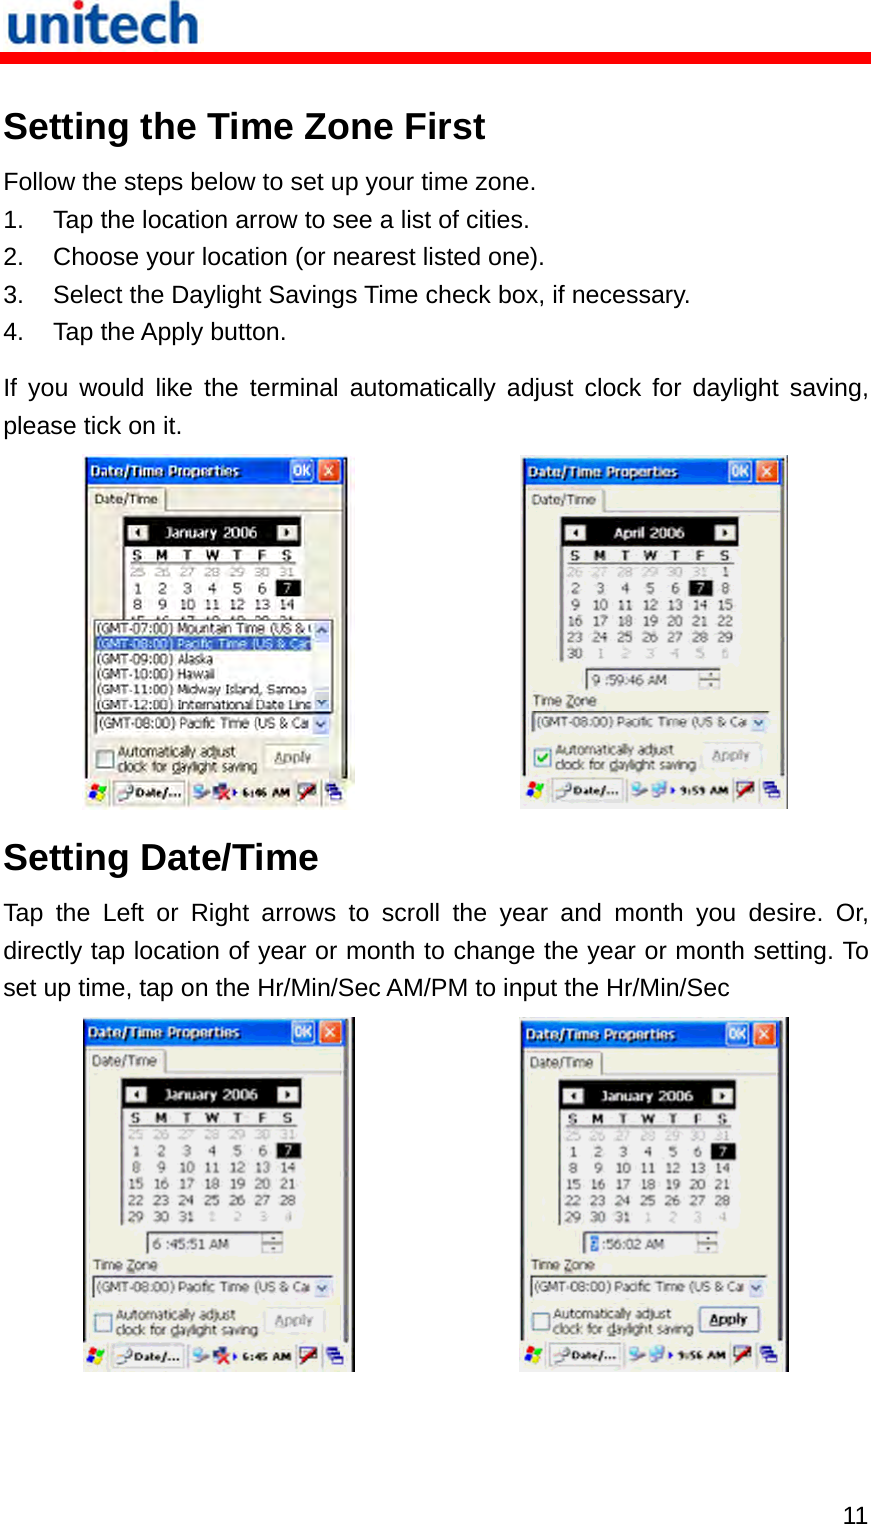   11 Setting the Time Zone First Follow the steps below to set up your time zone. 1.  Tap the location arrow to see a list of cities. 2.  Choose your location (or nearest listed one). 3.  Select the Daylight Savings Time check box, if necessary. 4.  Tap the Apply button. If you would like the terminal automatically adjust clock for daylight saving, please tick on it.   Setting Date/Time Tap the Left or Right arrows to scroll the year and month you desire. Or, directly tap location of year or month to change the year or month setting. To set up time, tap on the Hr/Min/Sec AM/PM to input the Hr/Min/Sec   